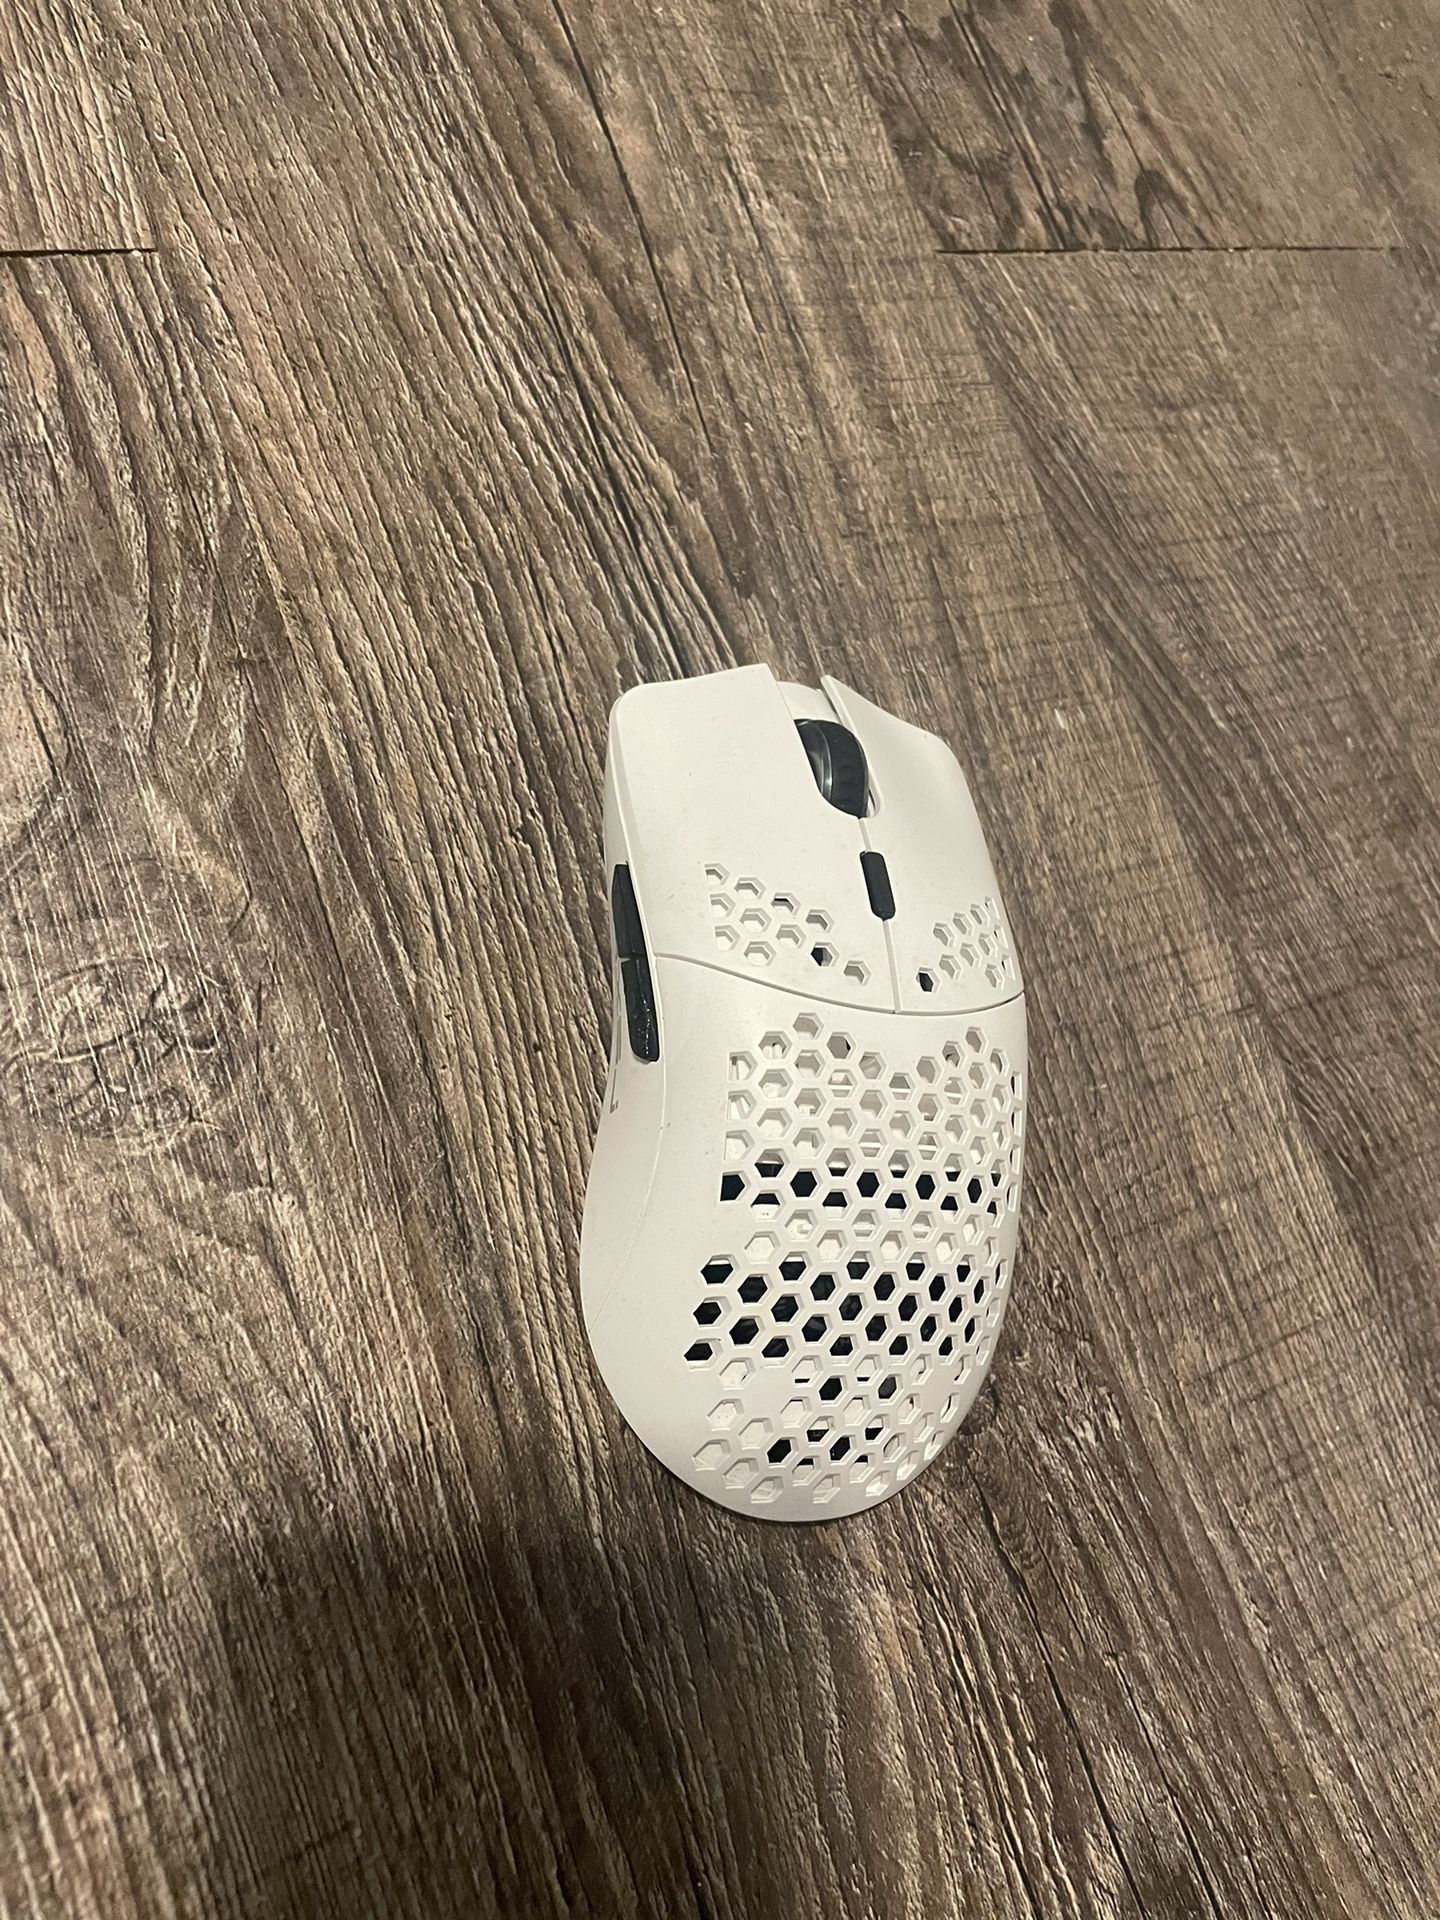 gaming mouse 